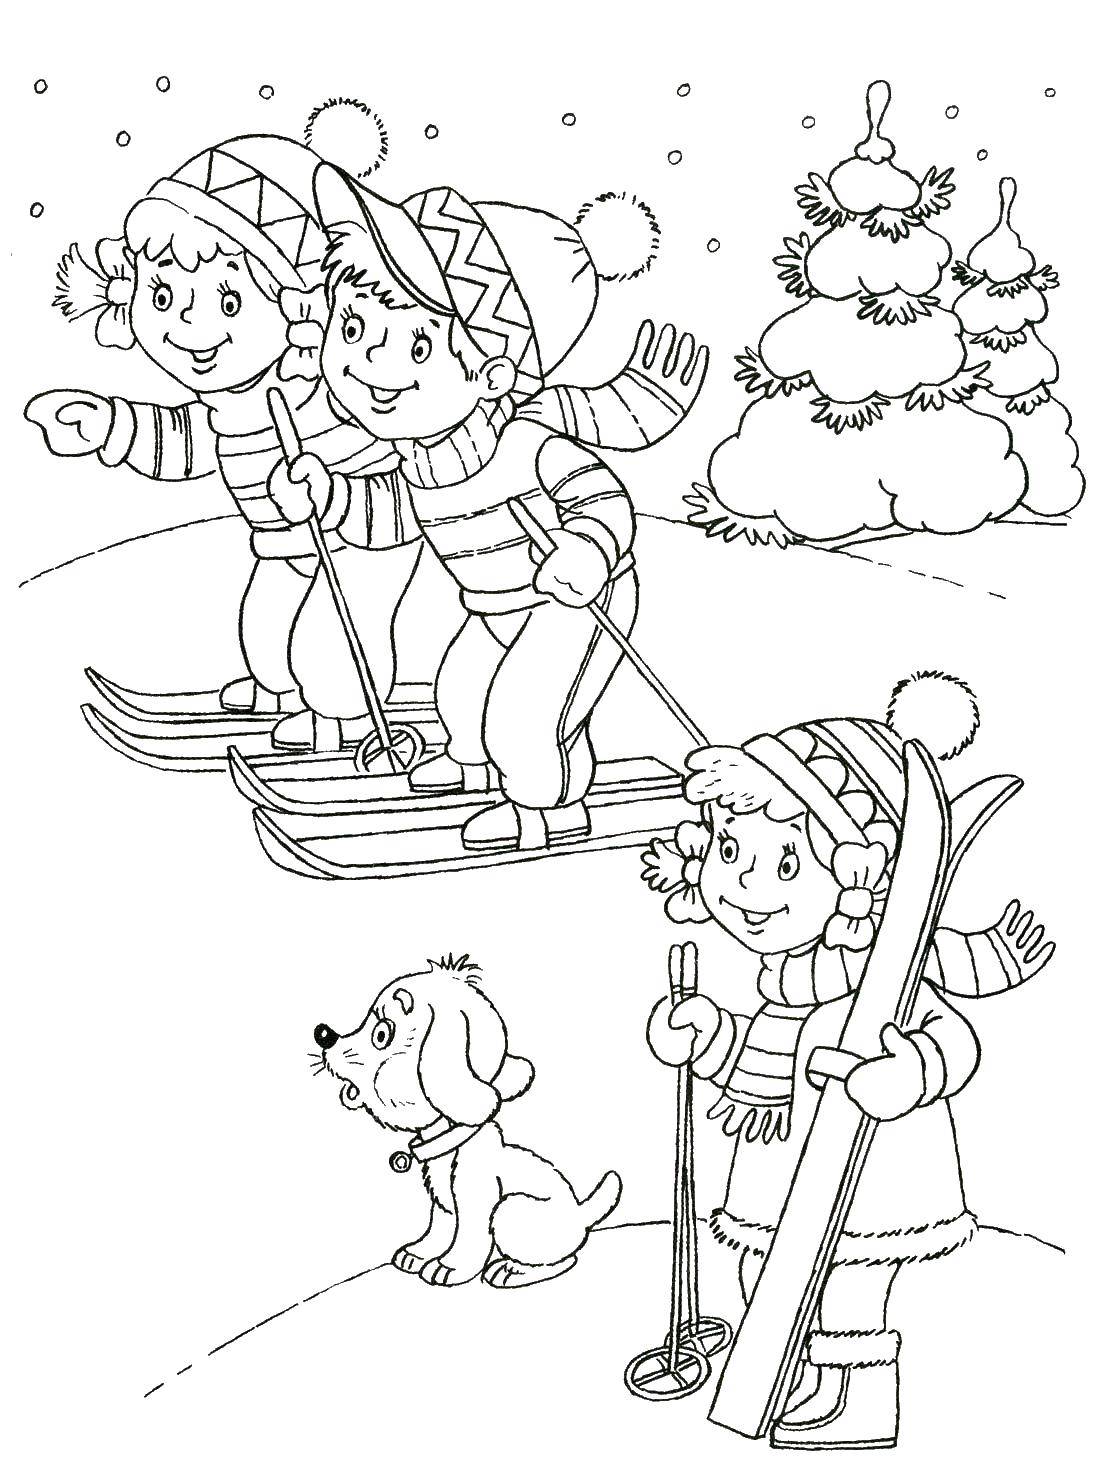 Coloring Kids ski. Category skiing. Tags:  children, romance, puppy.